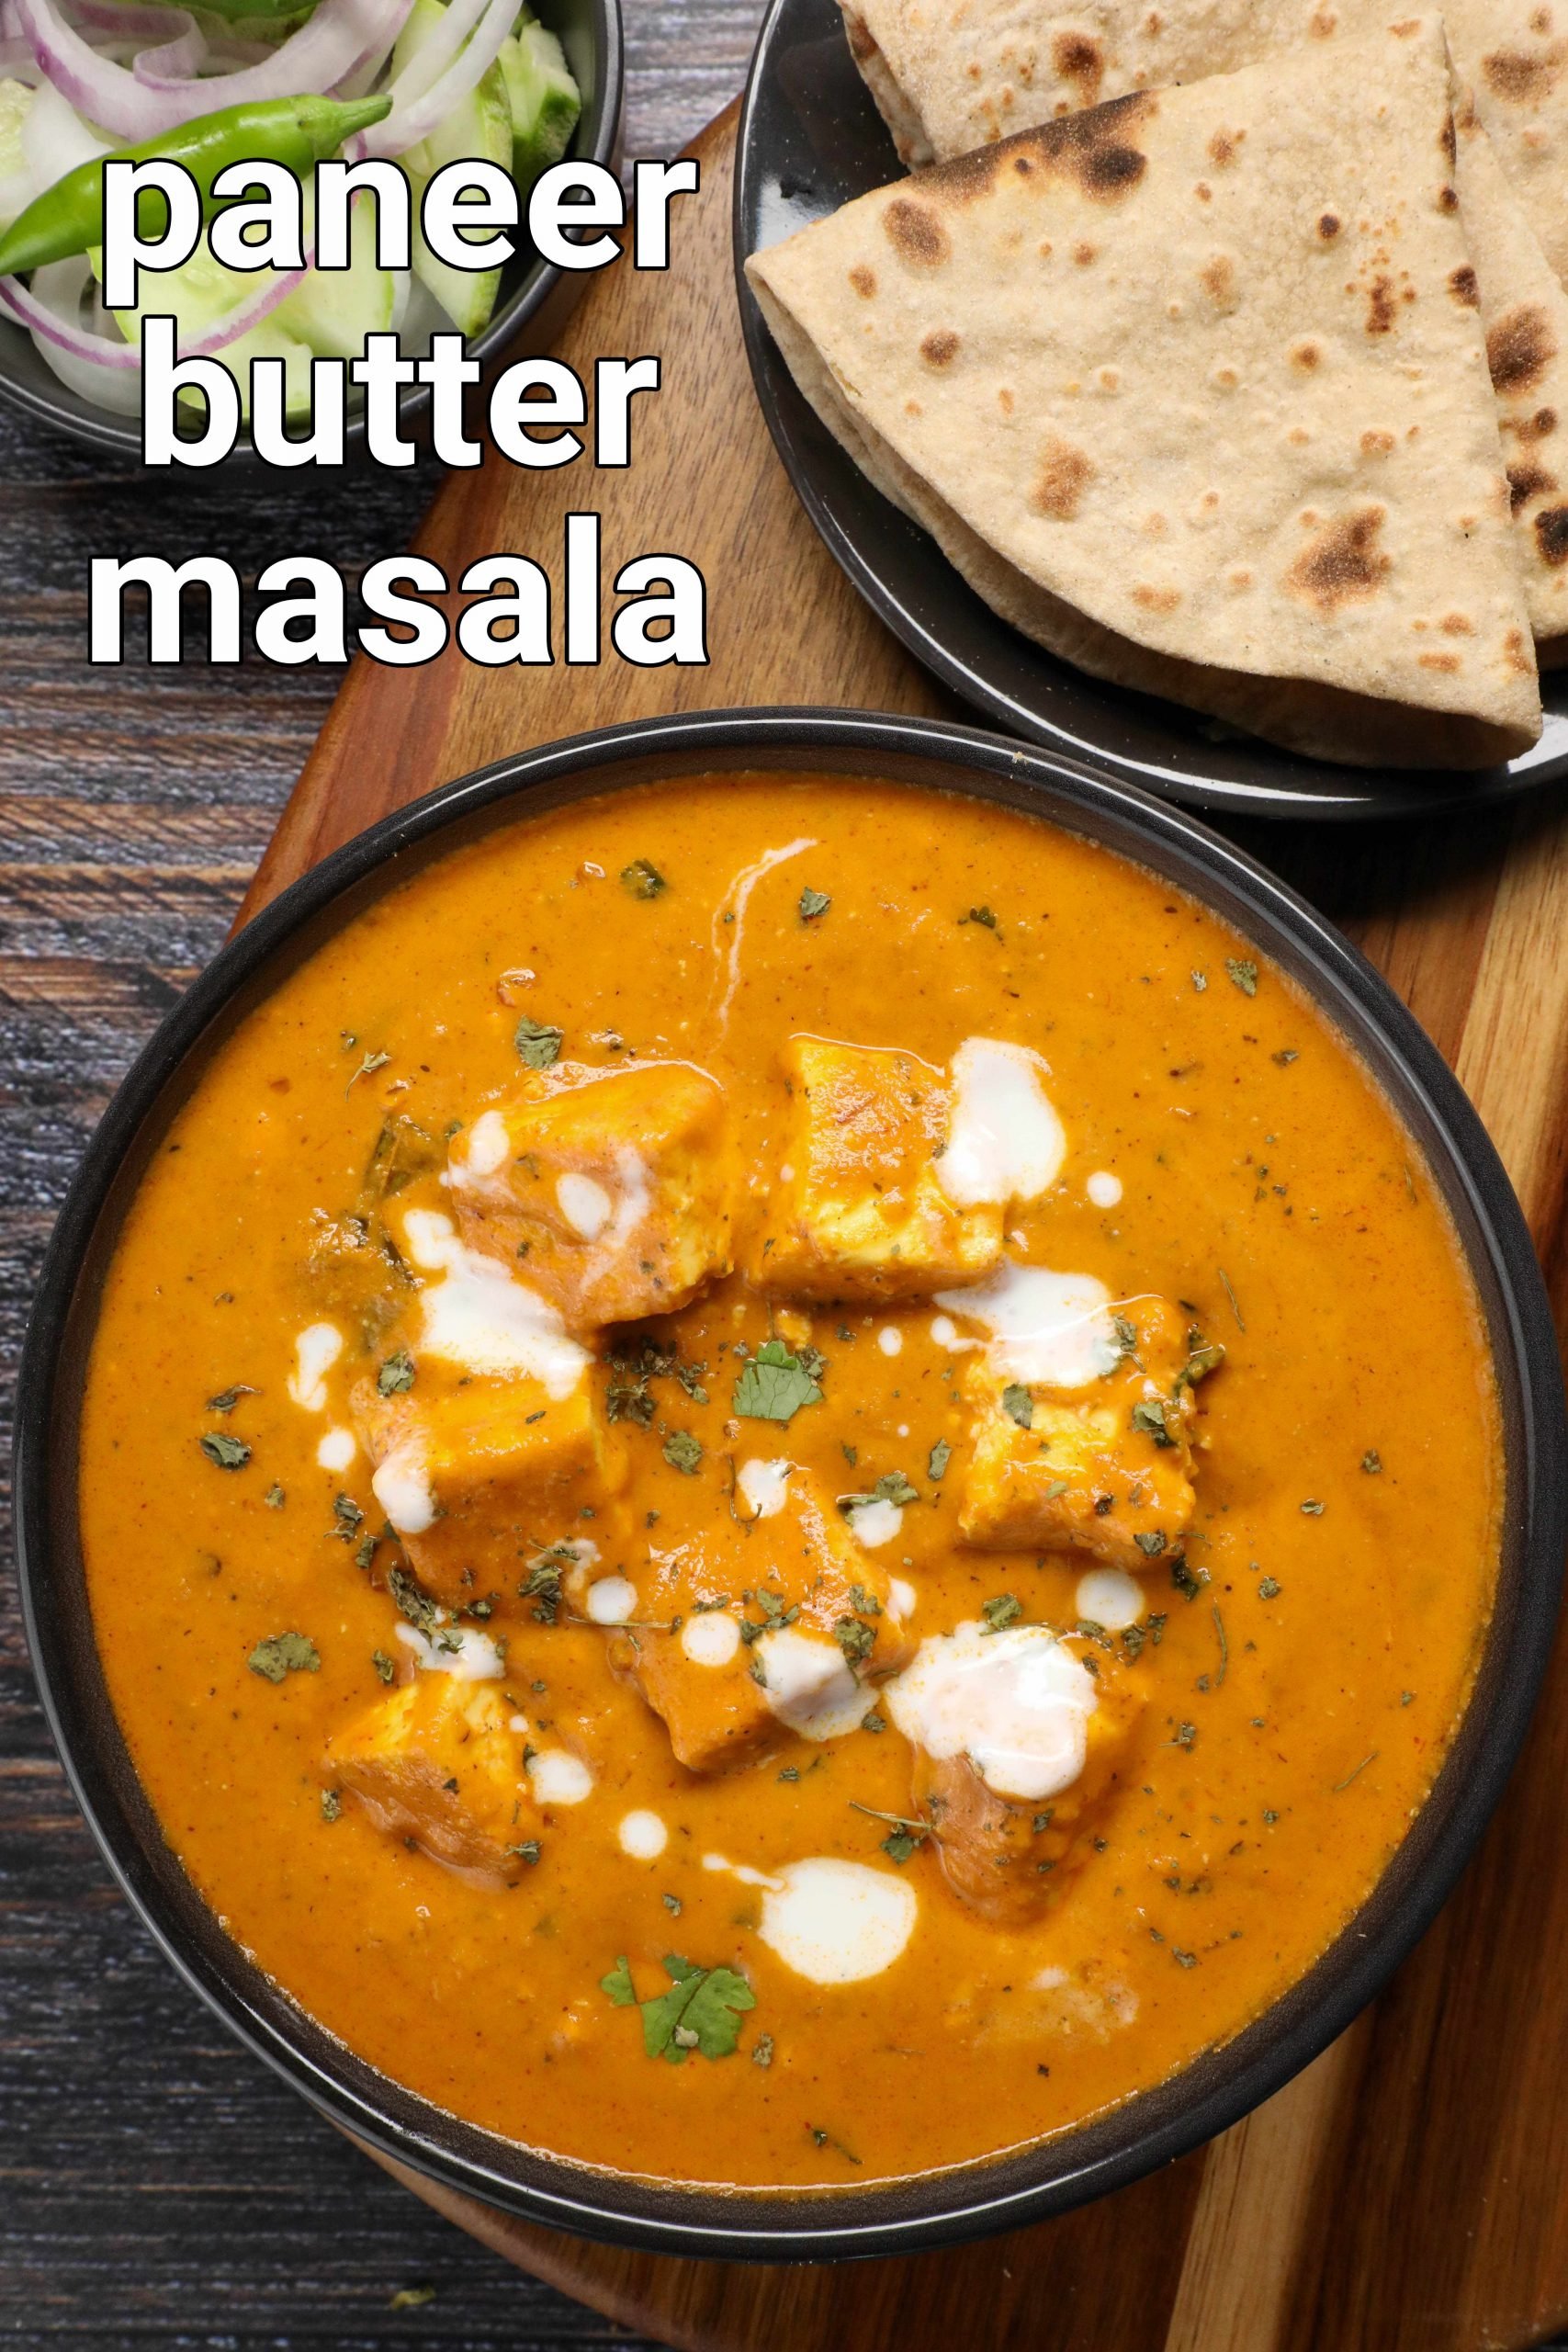 Sale > paneer butter masala with roti > in stock